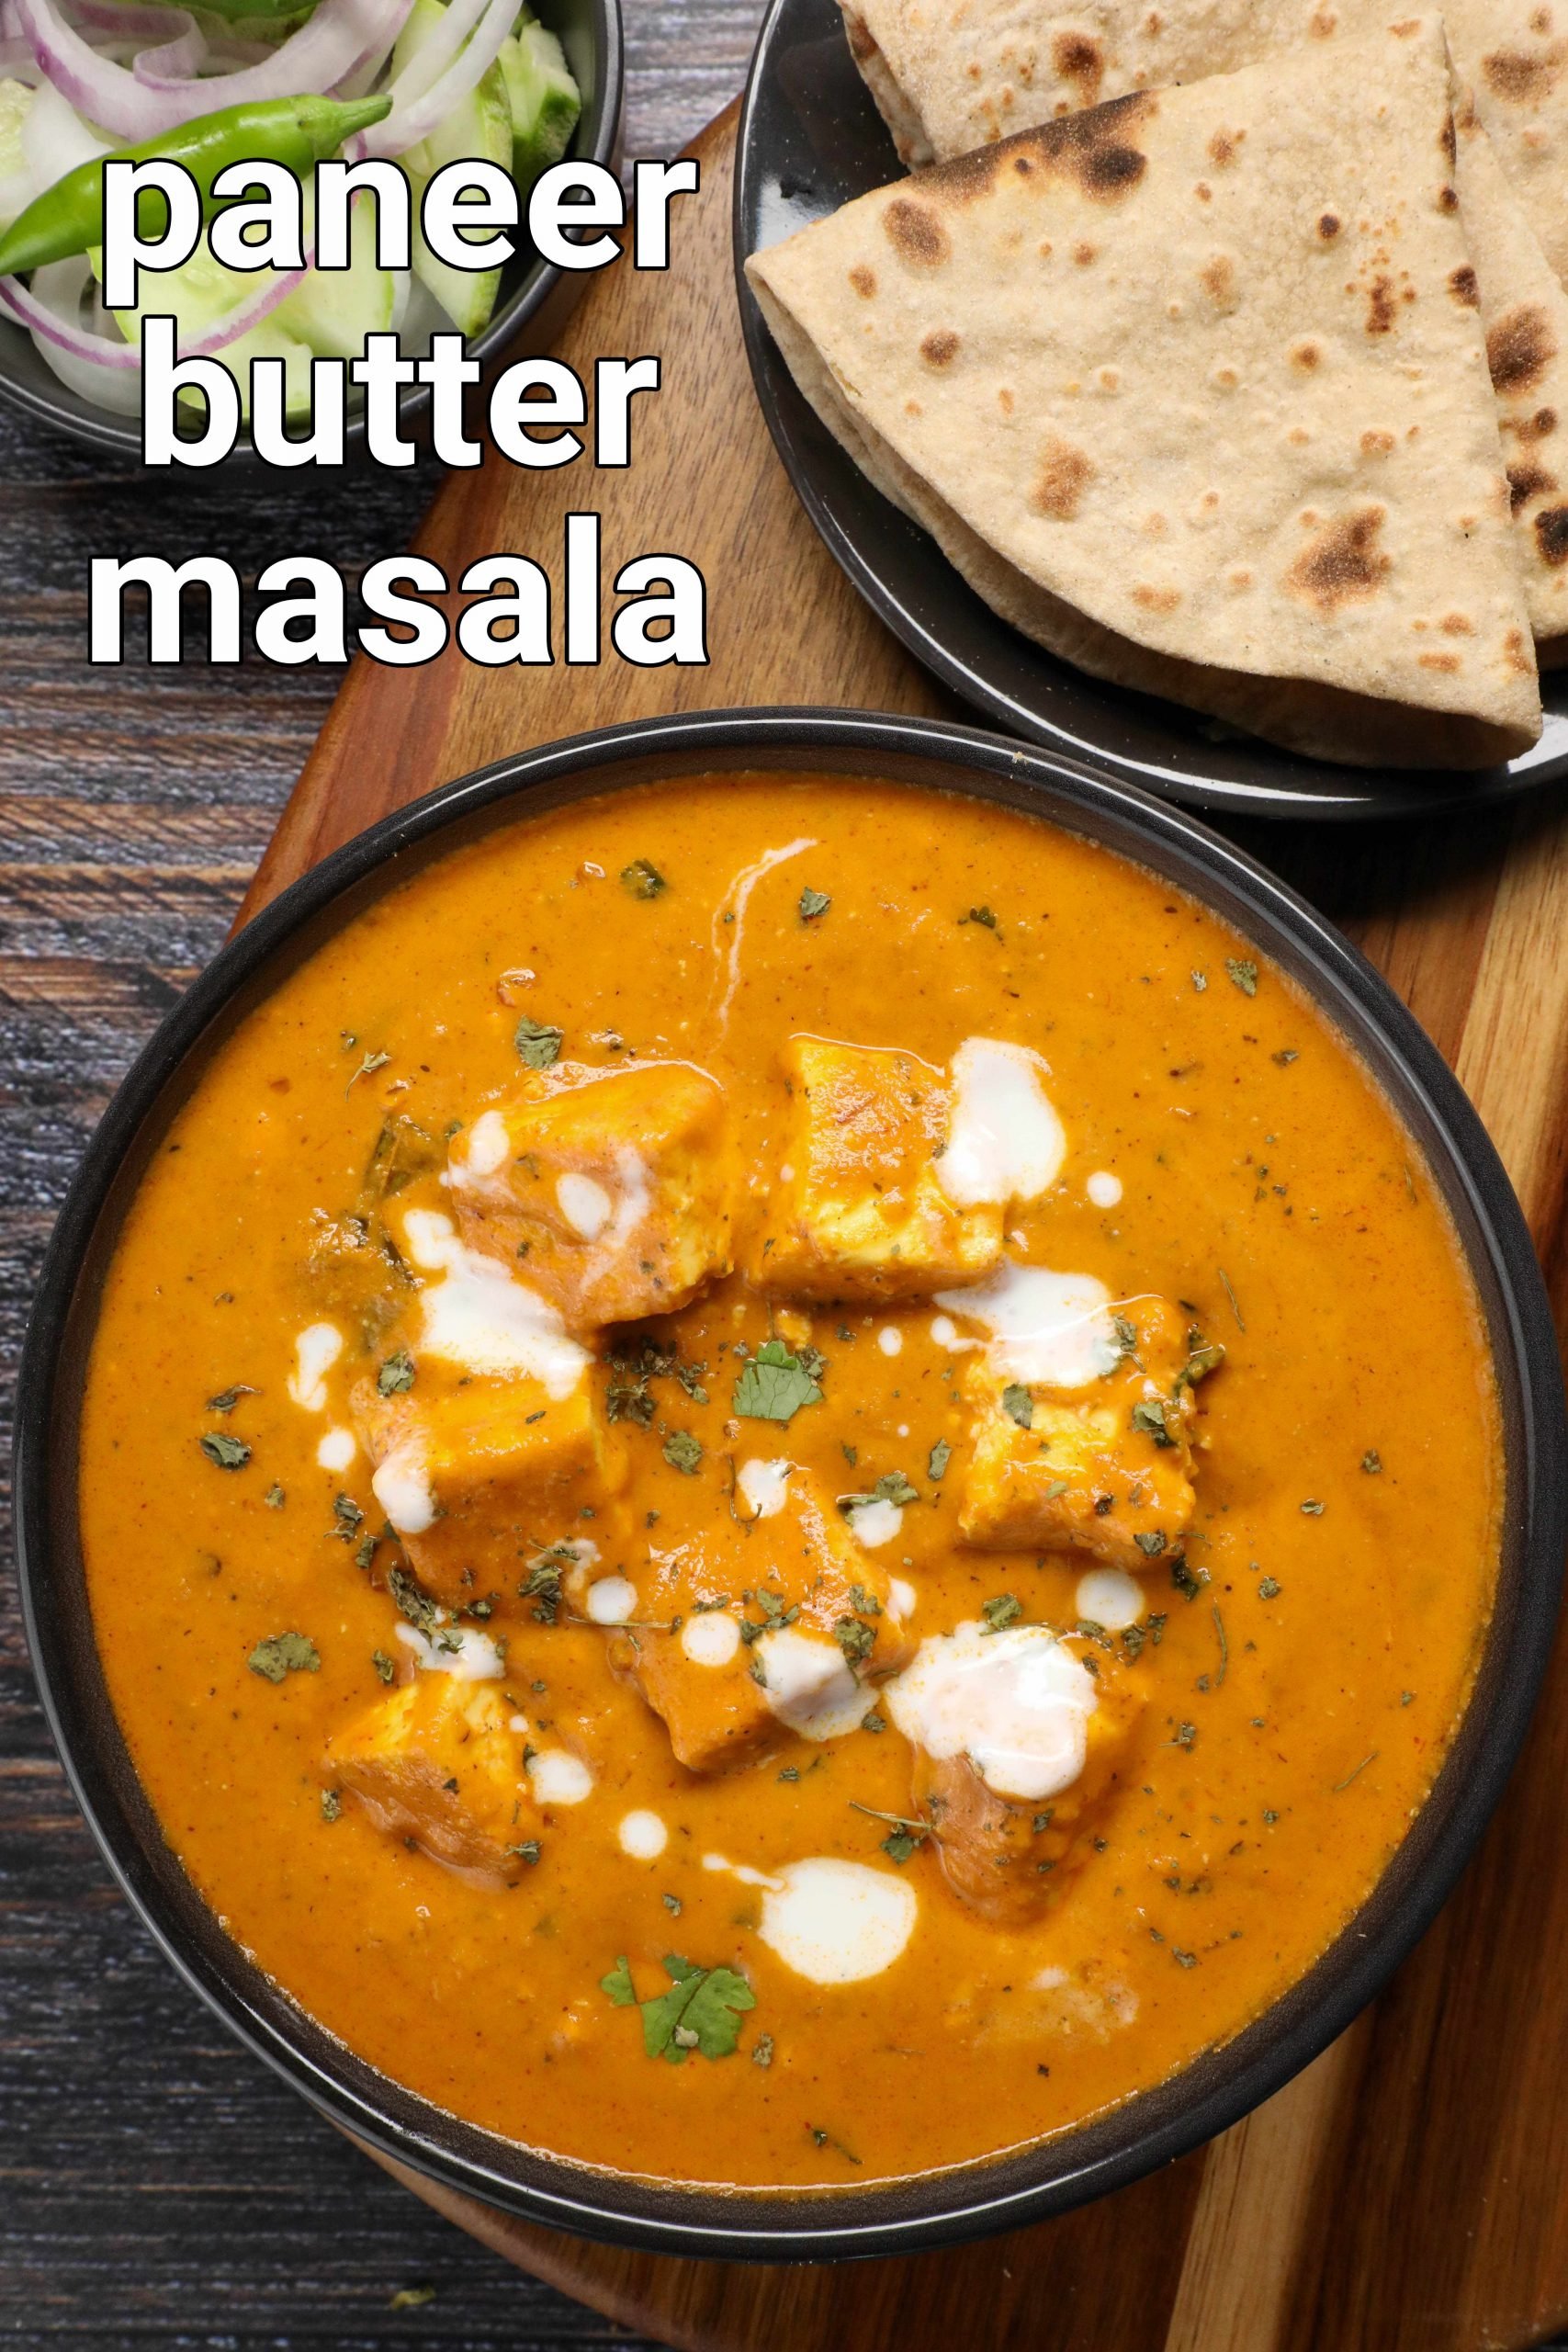 Sale > paneer butter masala with roti > in stock